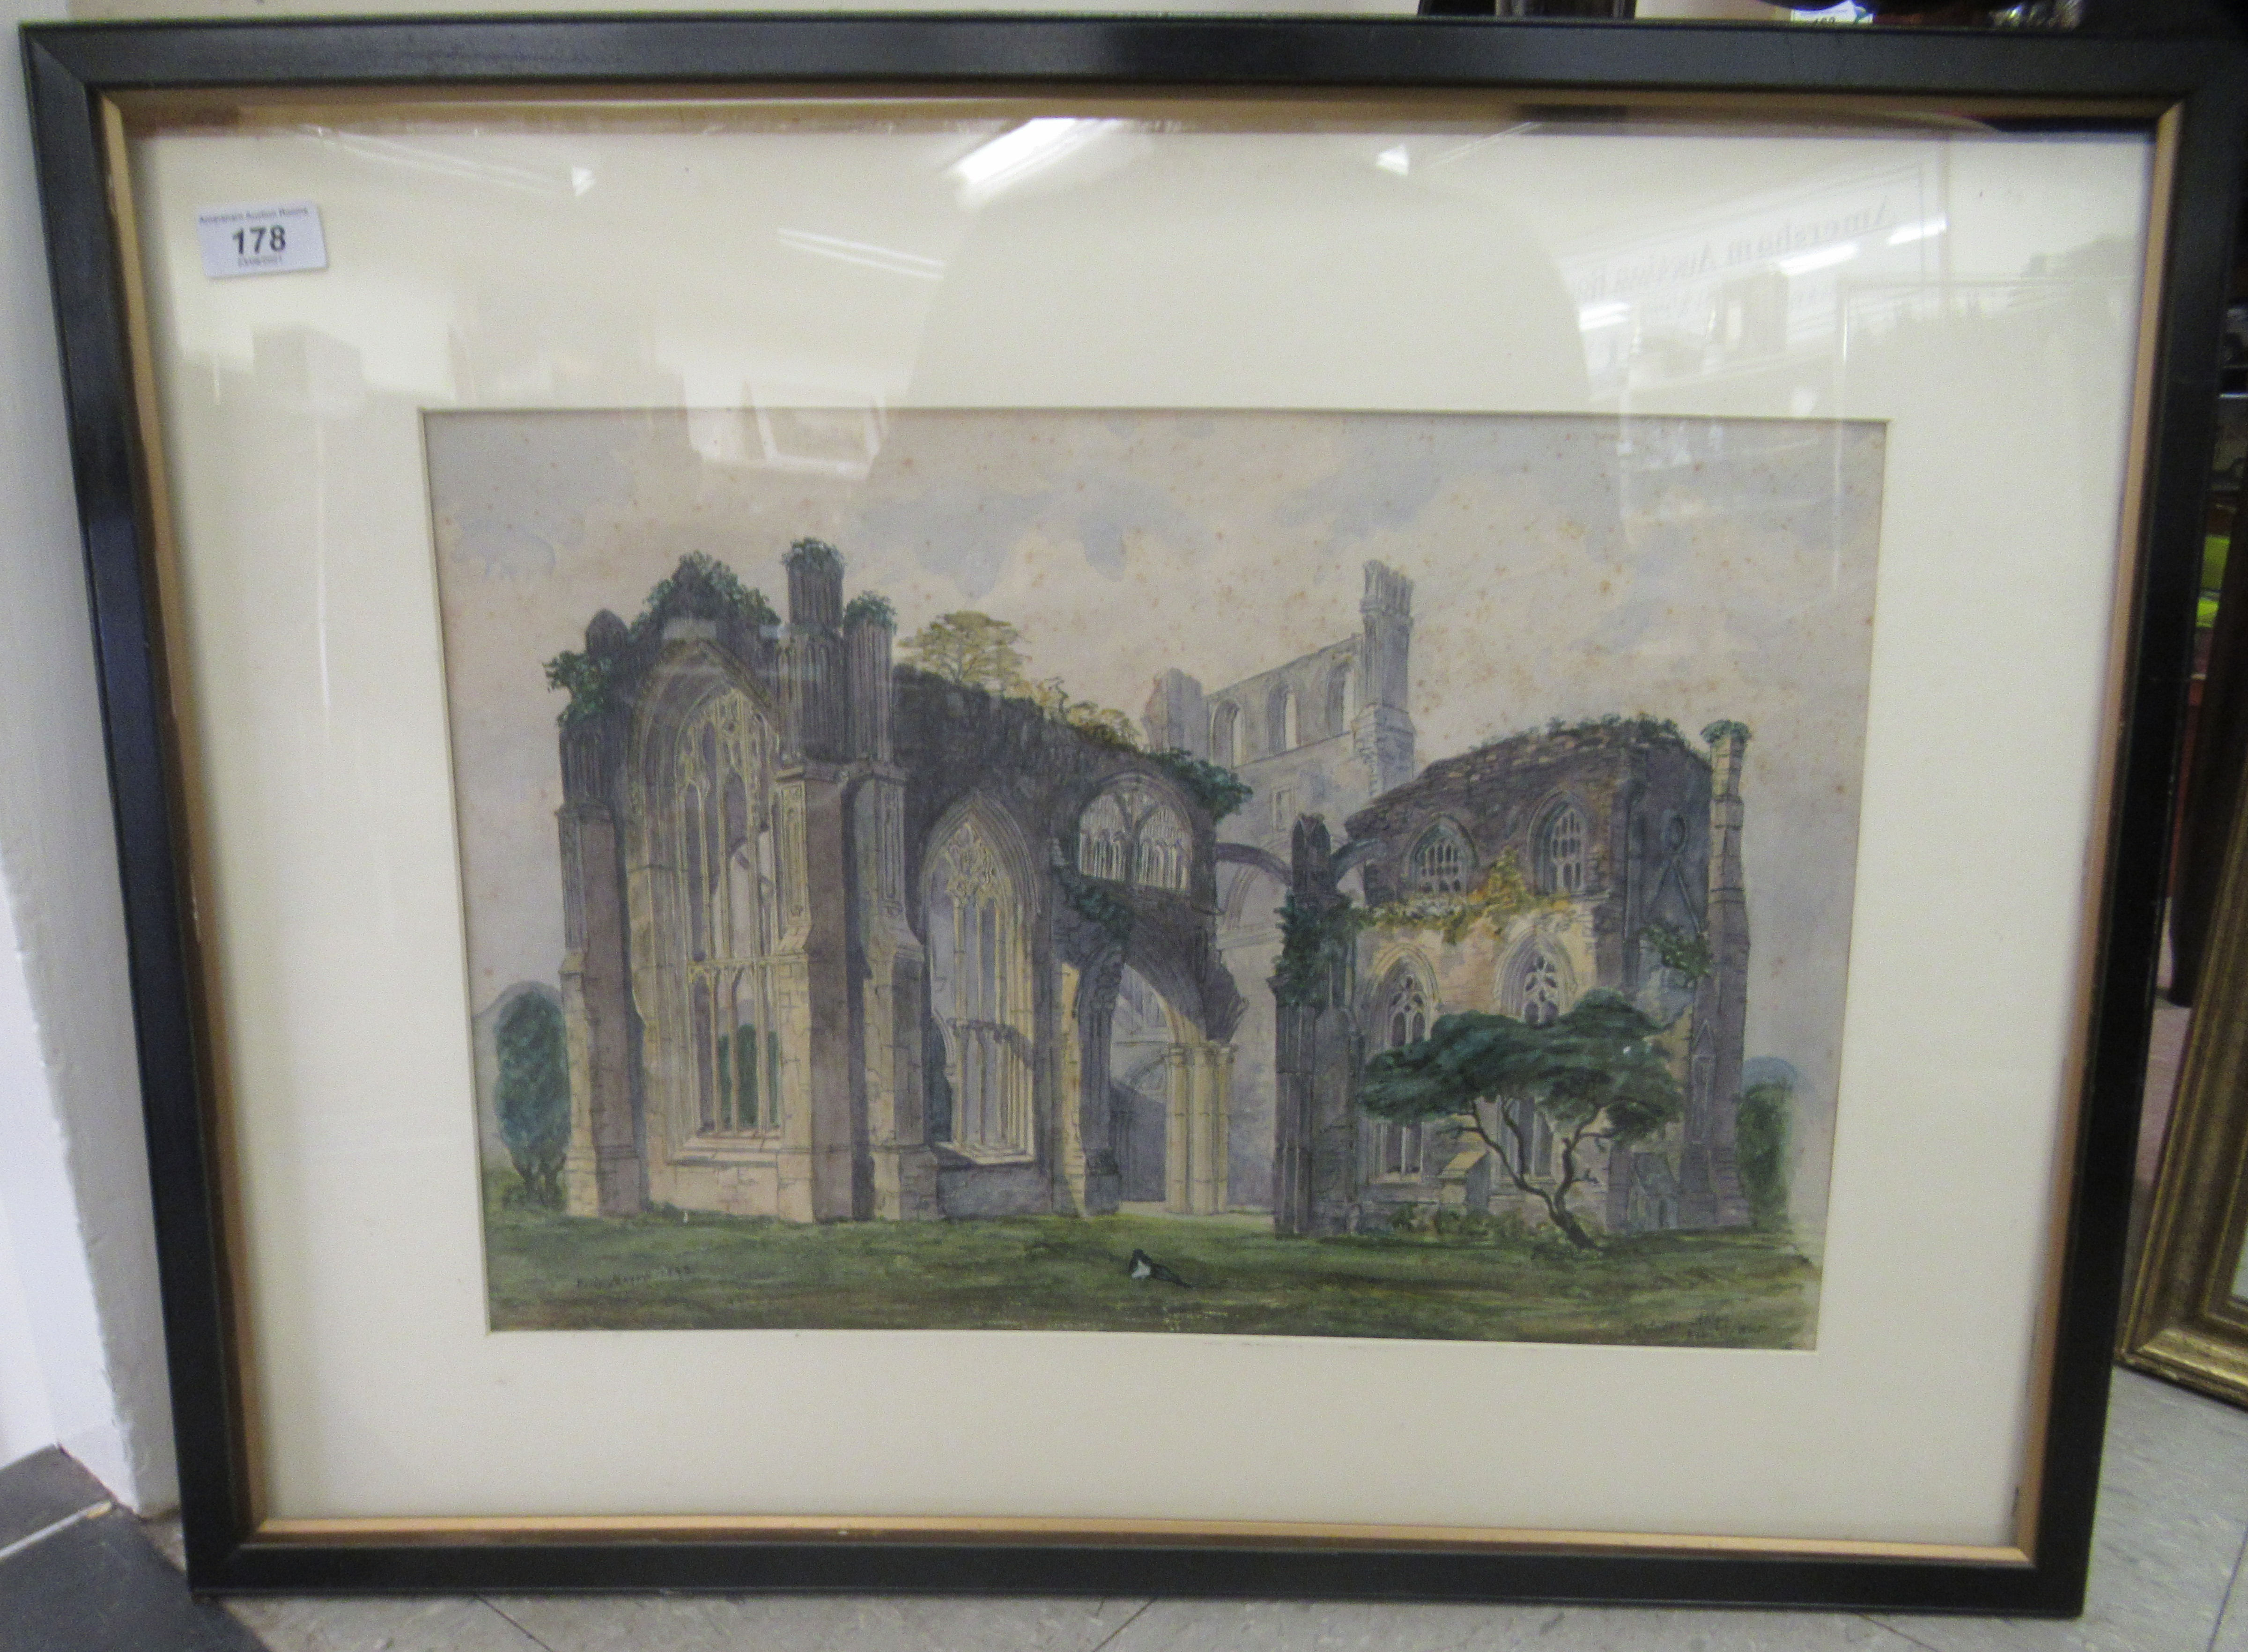 Elsie May - 'Melrose Abbey'  watercolour  bears a signature & dated 1892  12" x 18.5"  framed